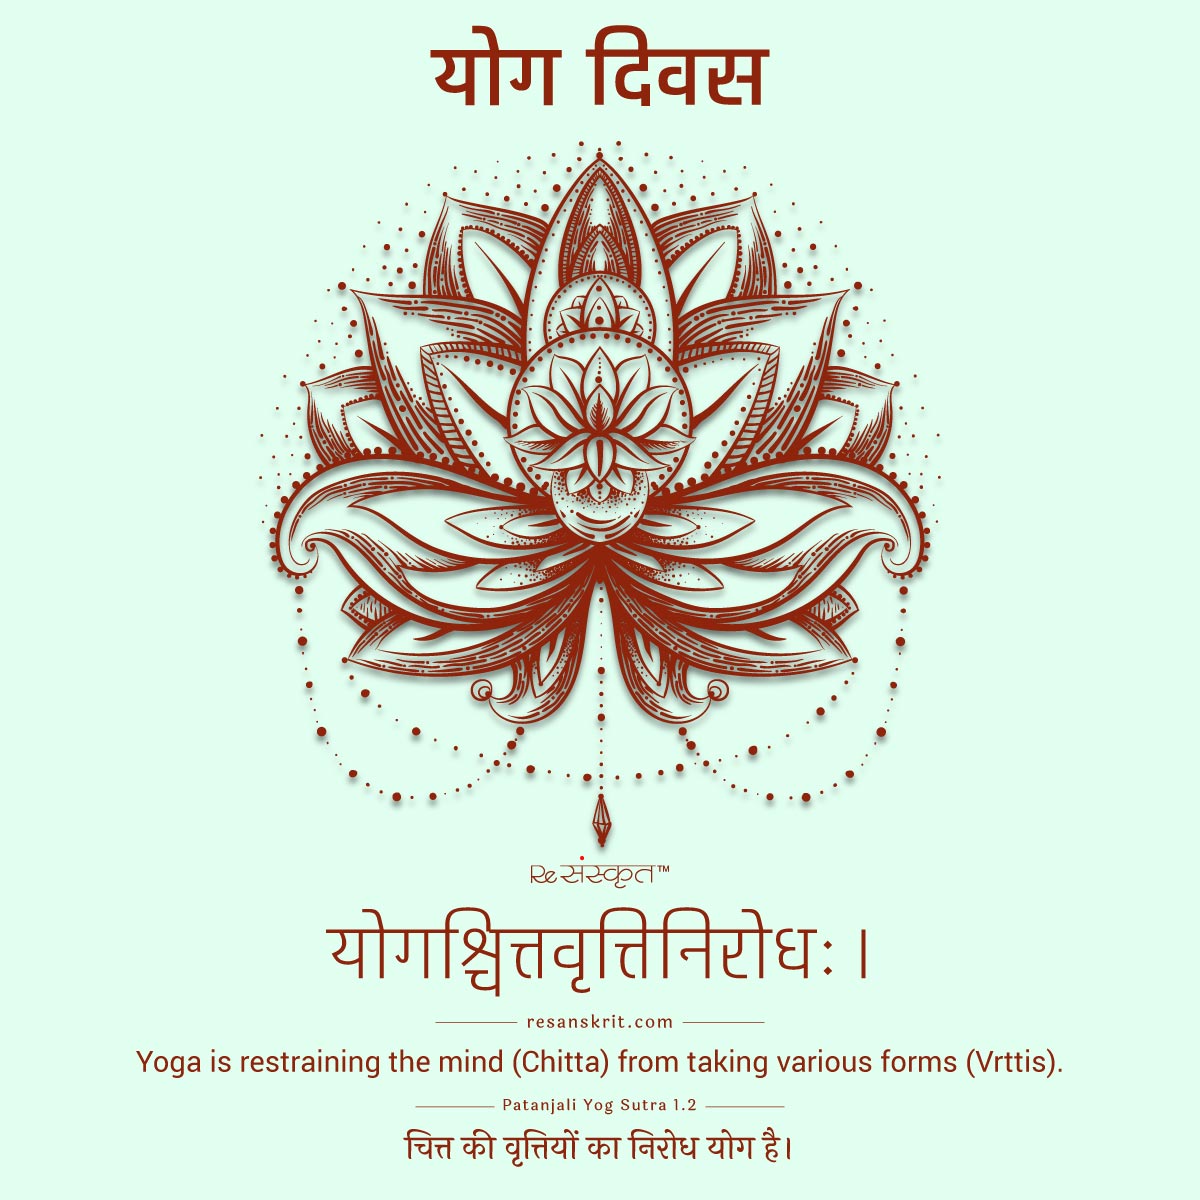 Patanjali yoga sutra images